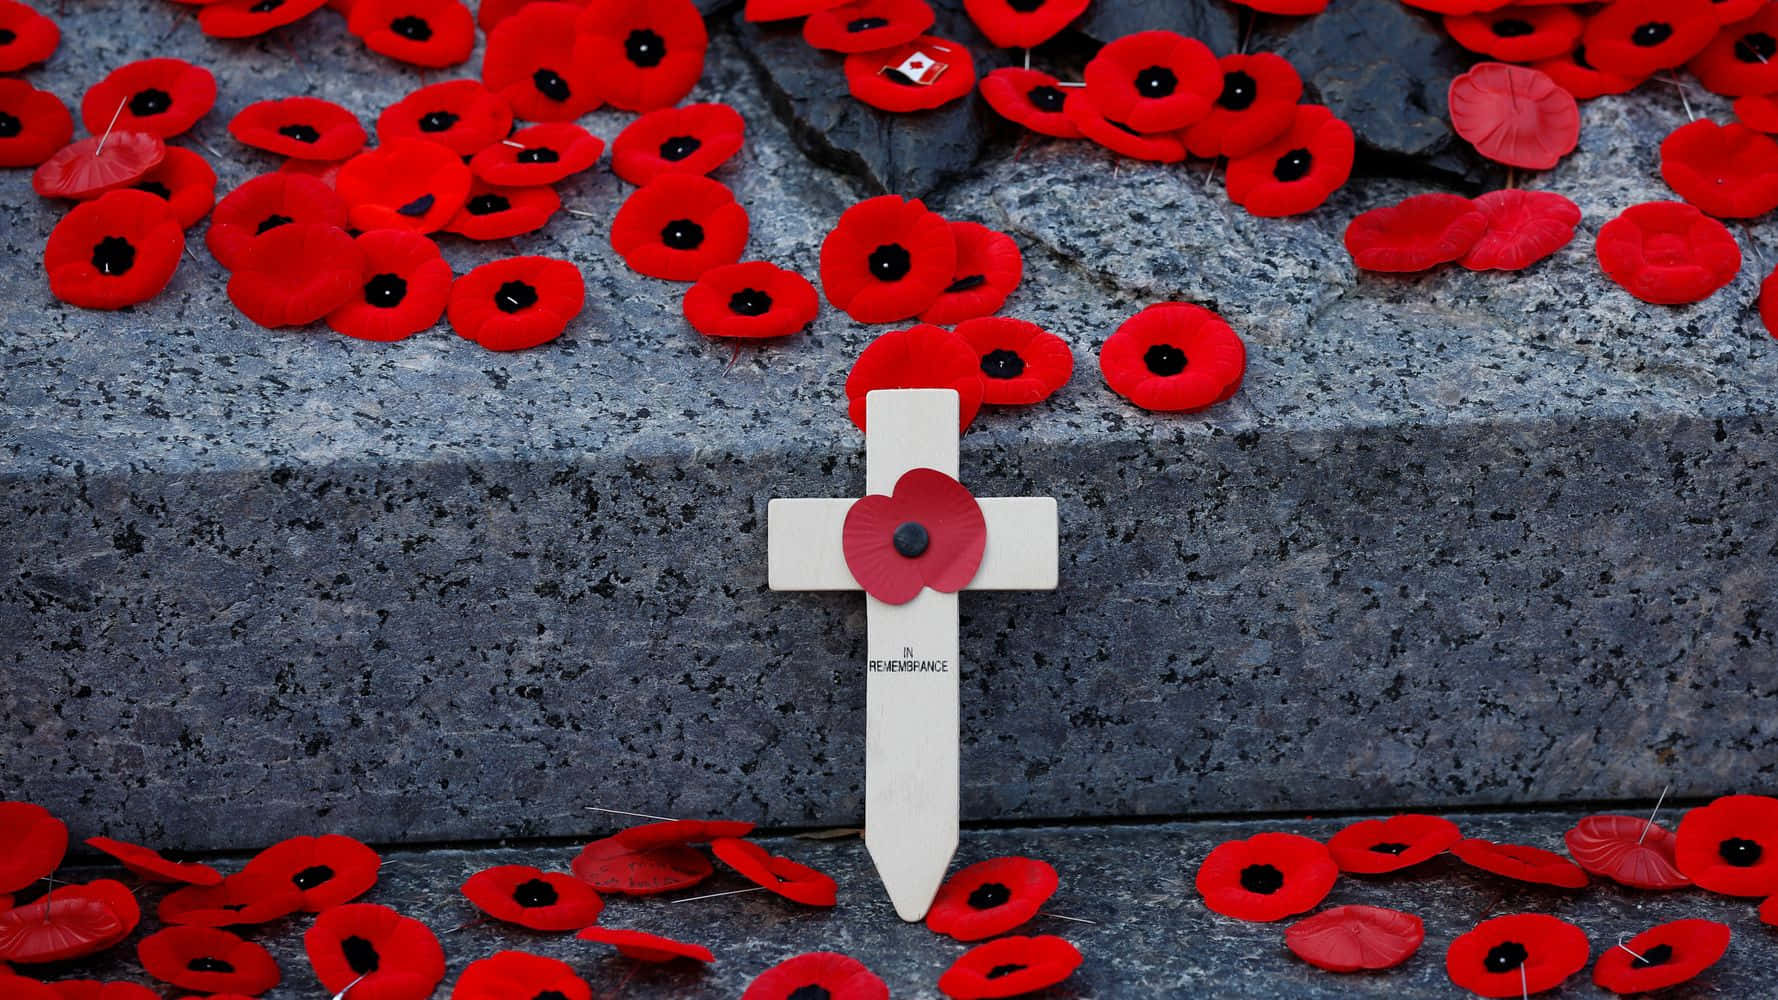 Honouring Heroes On Remembrance Day Wallpaper